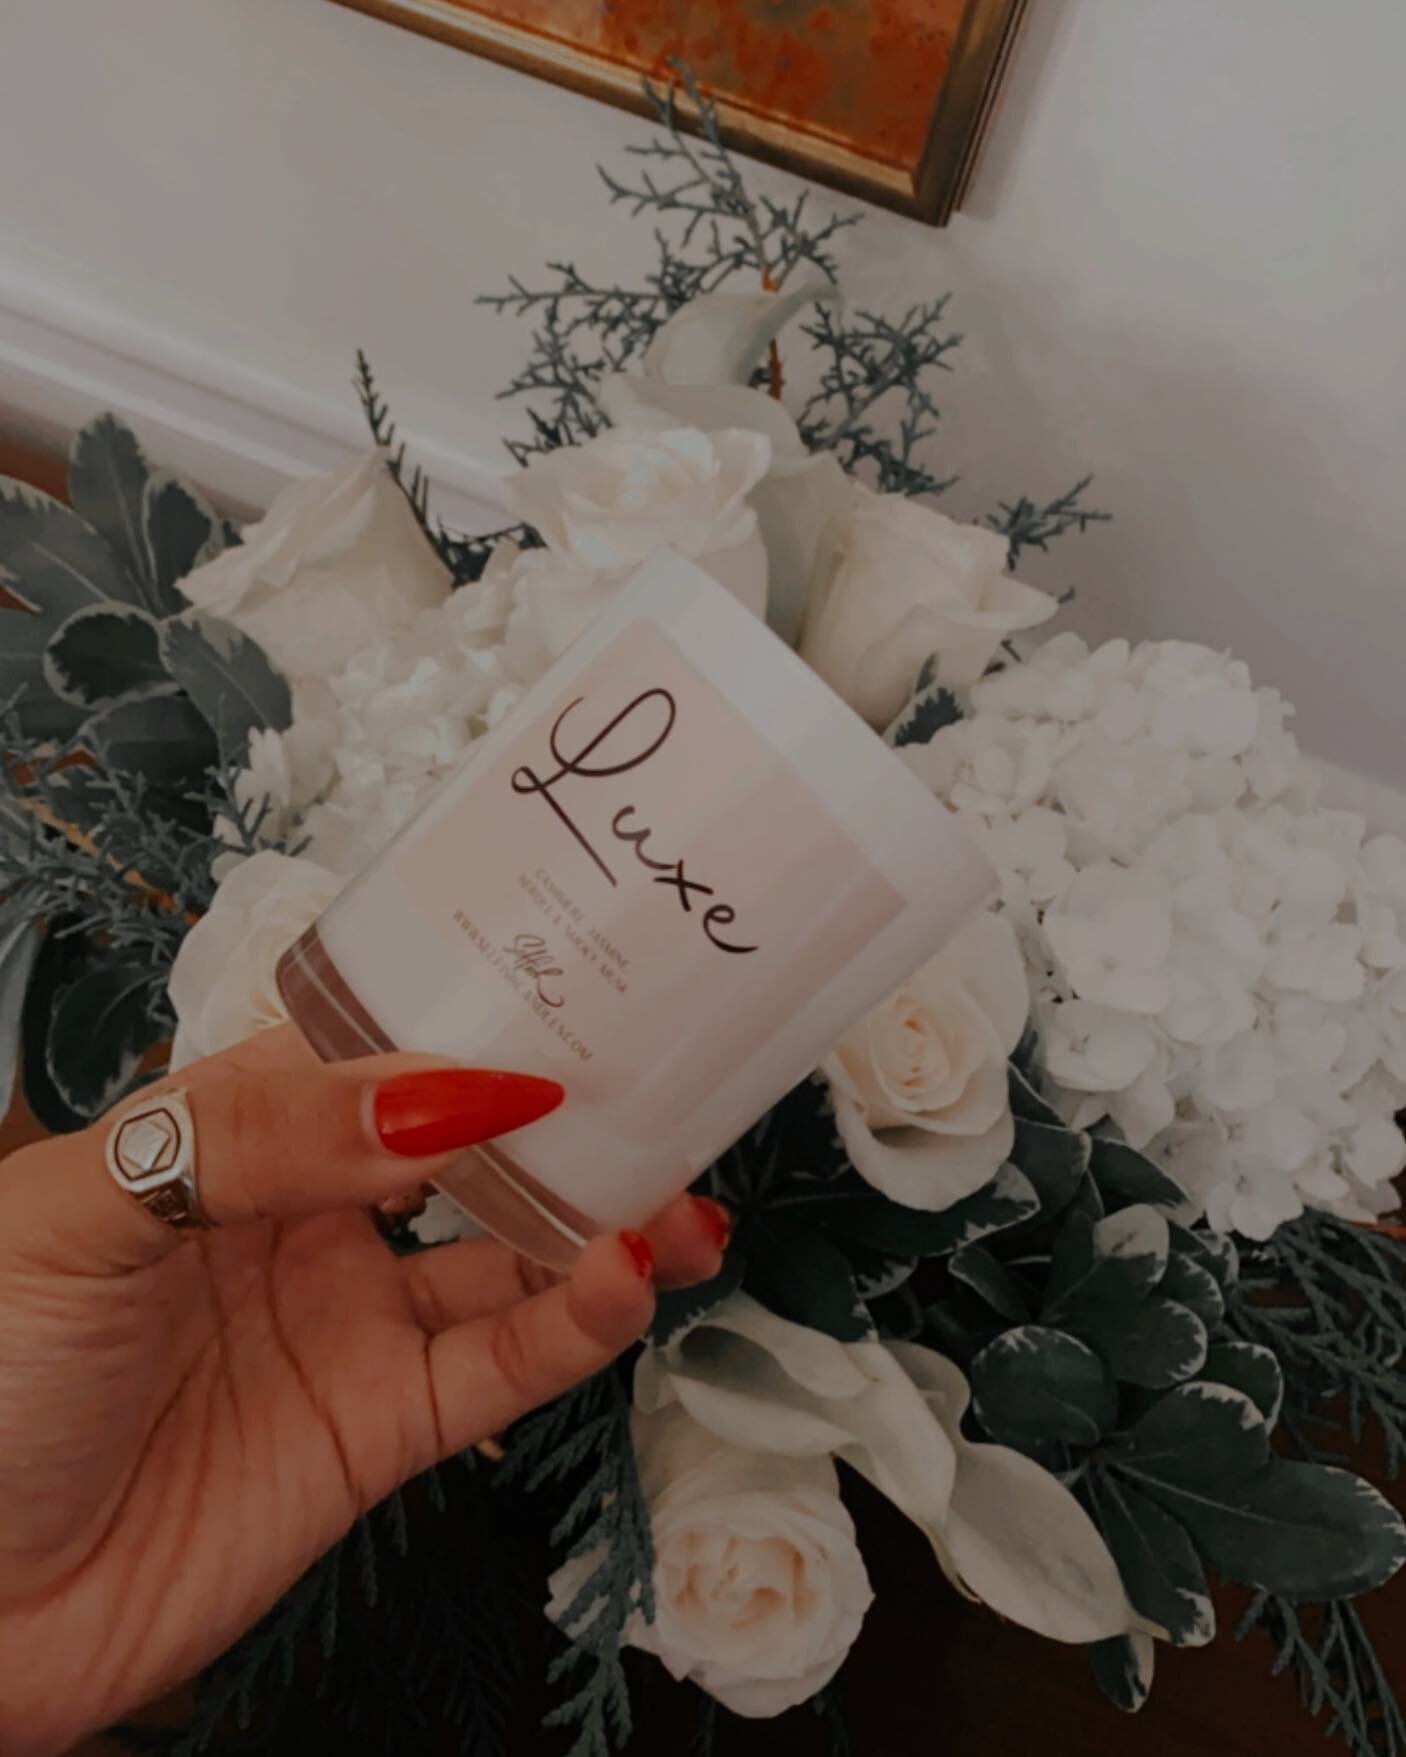 Fresh florals. Red nails. Luxe Candles.
Our kind of self-care Sunday. 🕯
&bull;
&bull;
&bull;
#selfcare #sundayvibes #candles #flowers #smallbusiness #blackownedbusiness